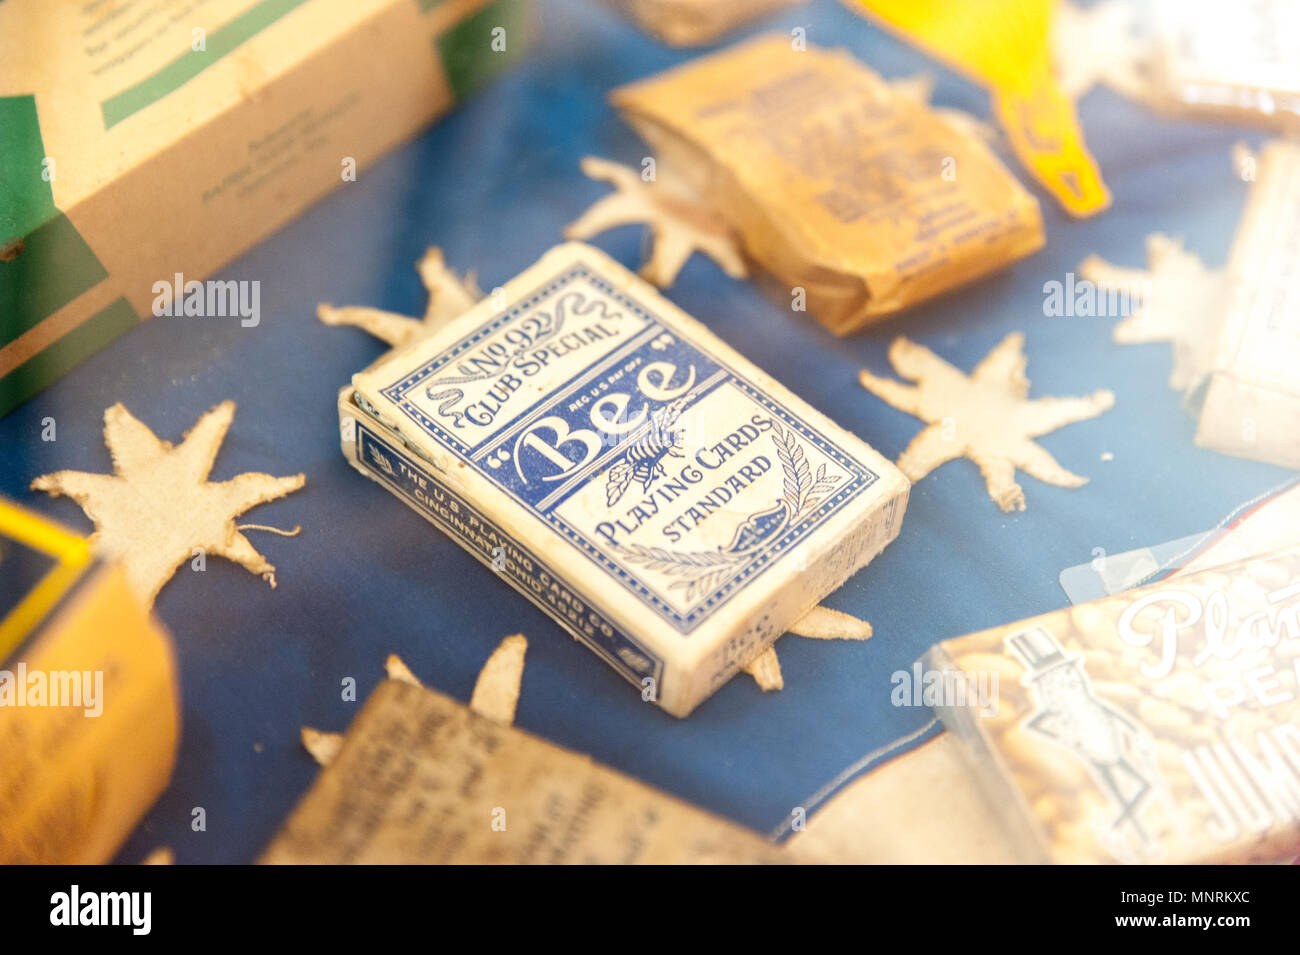 Daily things from World War II belongs to Battle of the Bulge Museum. A milk chocolate box, playing card, pop corn and cheeses. Stock Photo